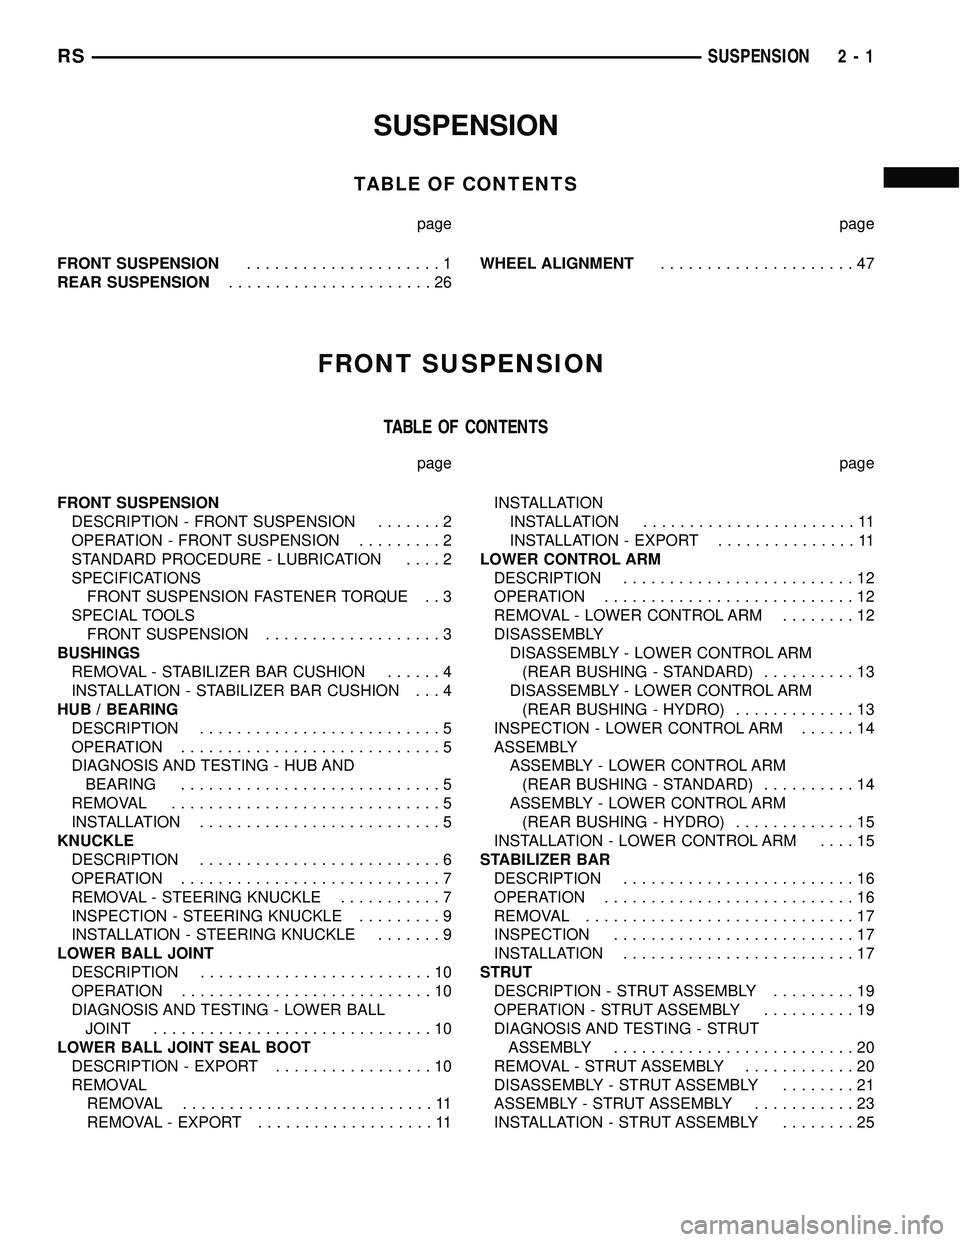 CHRYSLER CARAVAN 2005  Service Manual SUSPENSION
TABLE OF CONTENTS
page page
FRONT SUSPENSION.....................1
REAR SUSPENSION......................26WHEEL ALIGNMENT.....................47
FRONT SUSPENSION
TABLE OF CONTENTS
page page